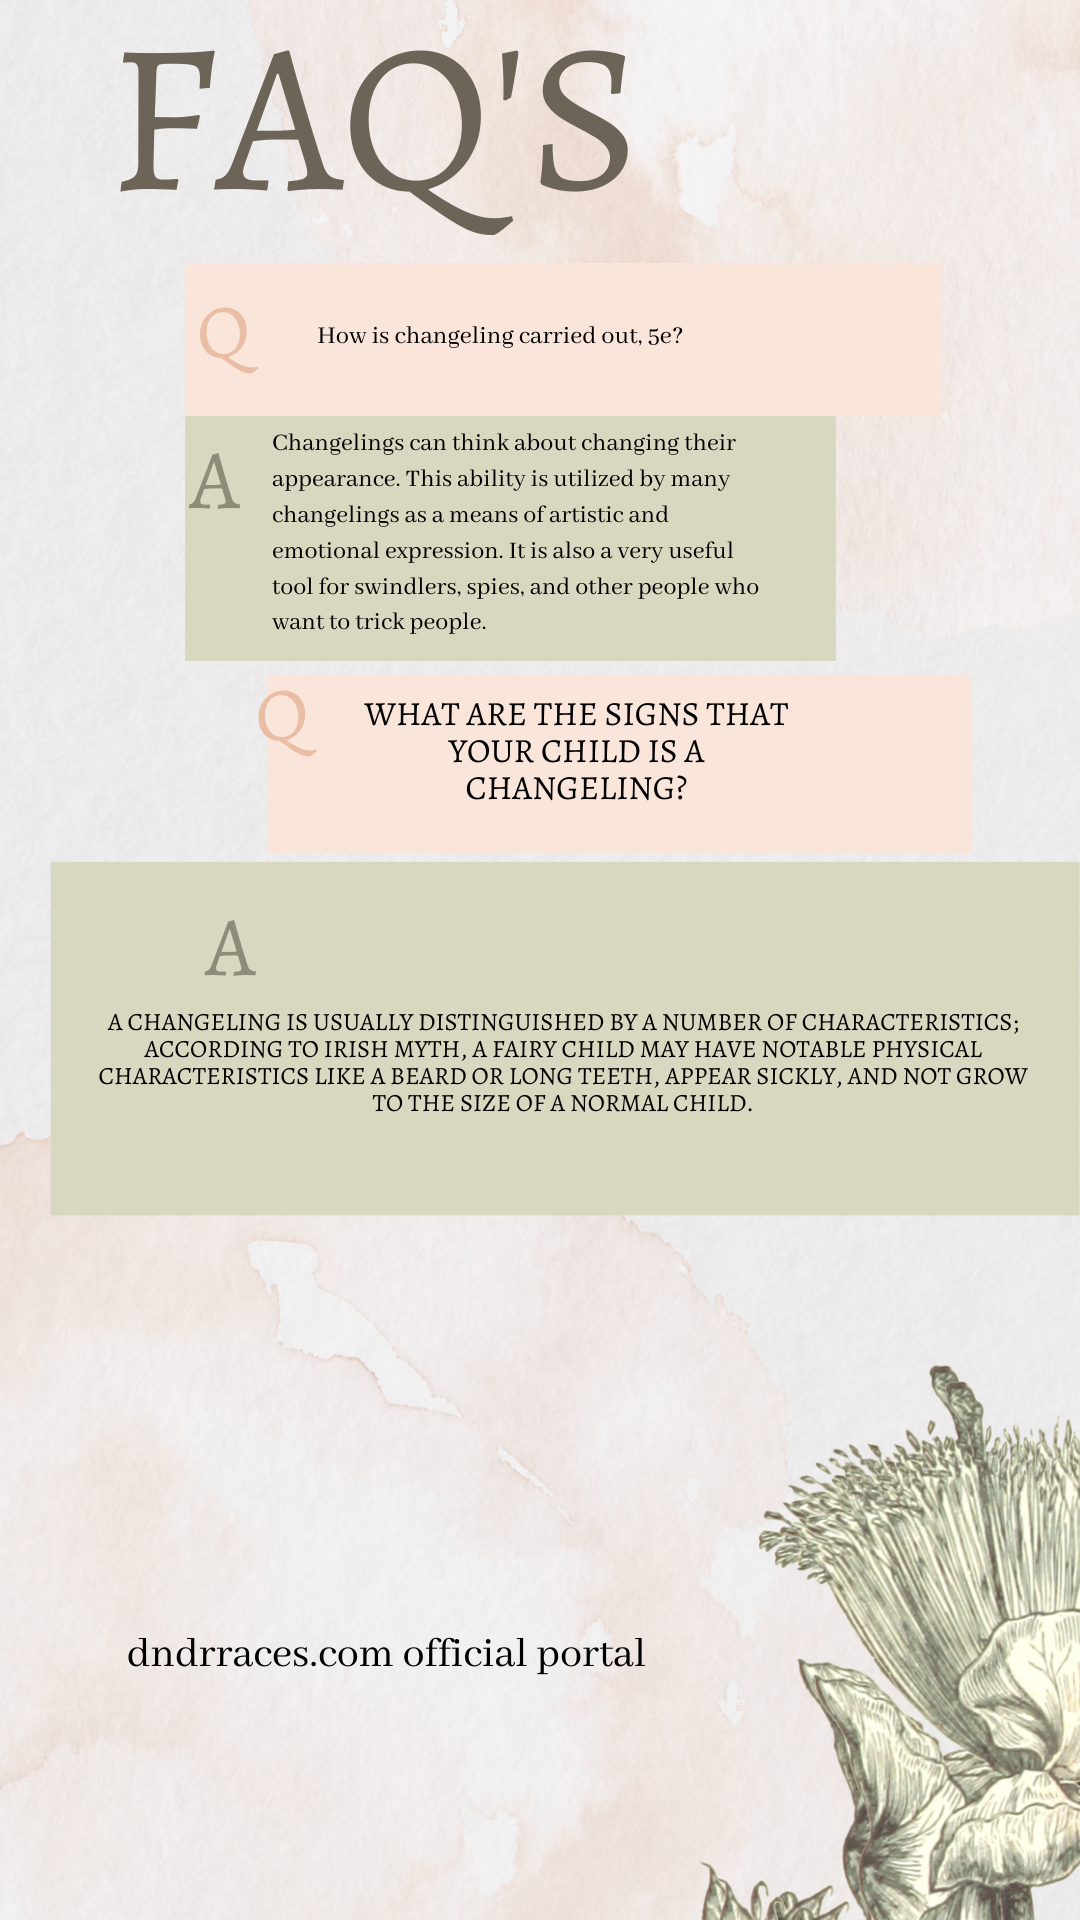 Changeling 5e faqs available here